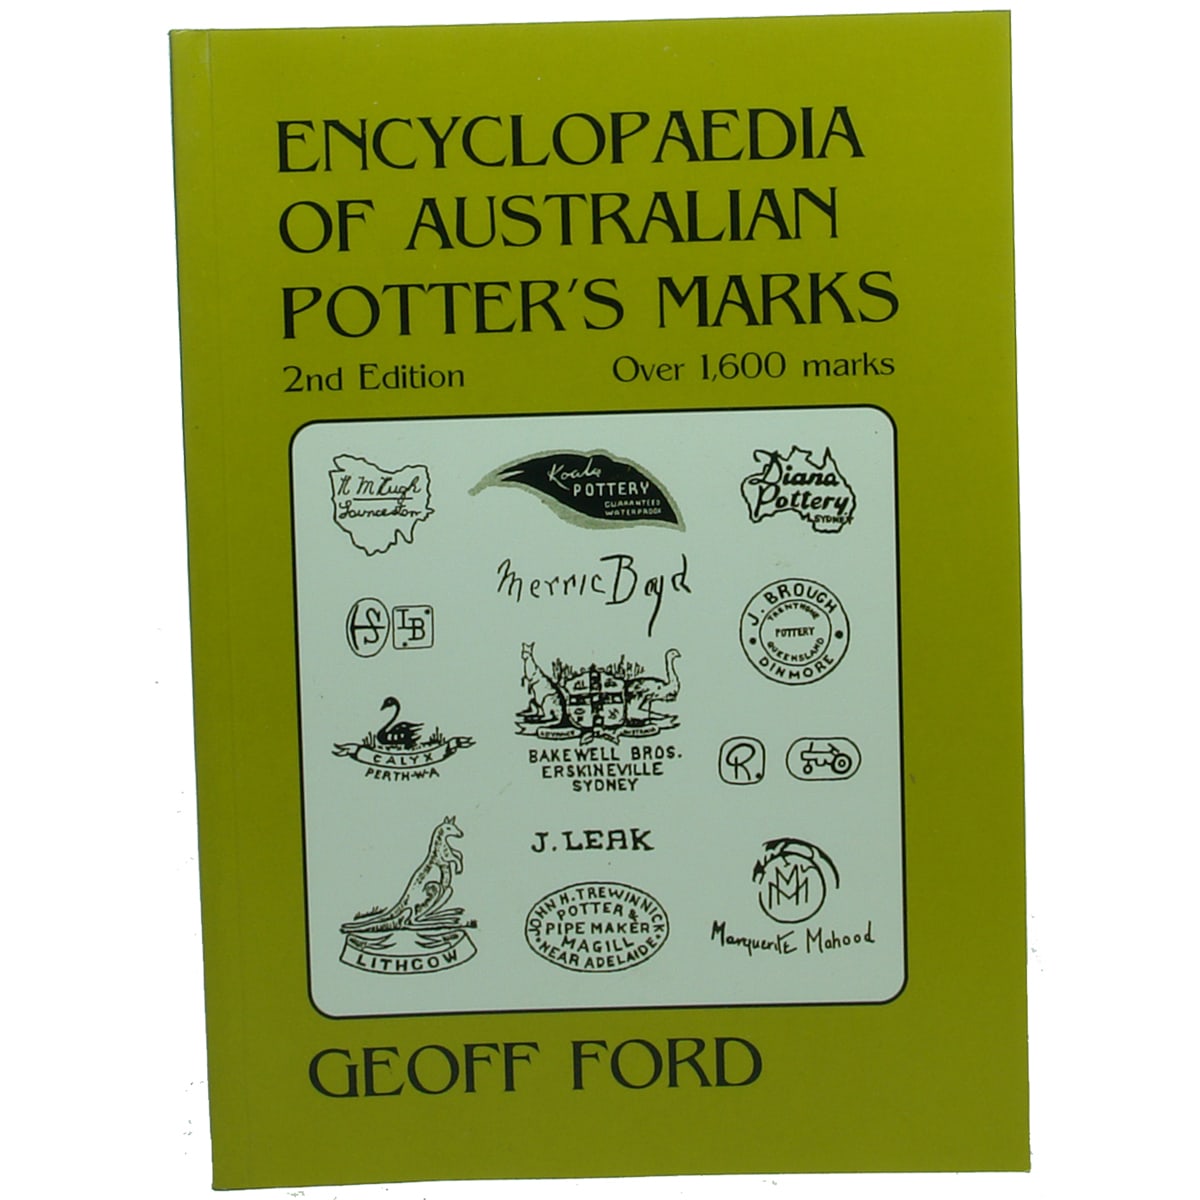 Book. Encyclopaedia of Australian Potter's Marks, 2nd Edition, Over 1,600 marks, Geoff Ford, 2002.